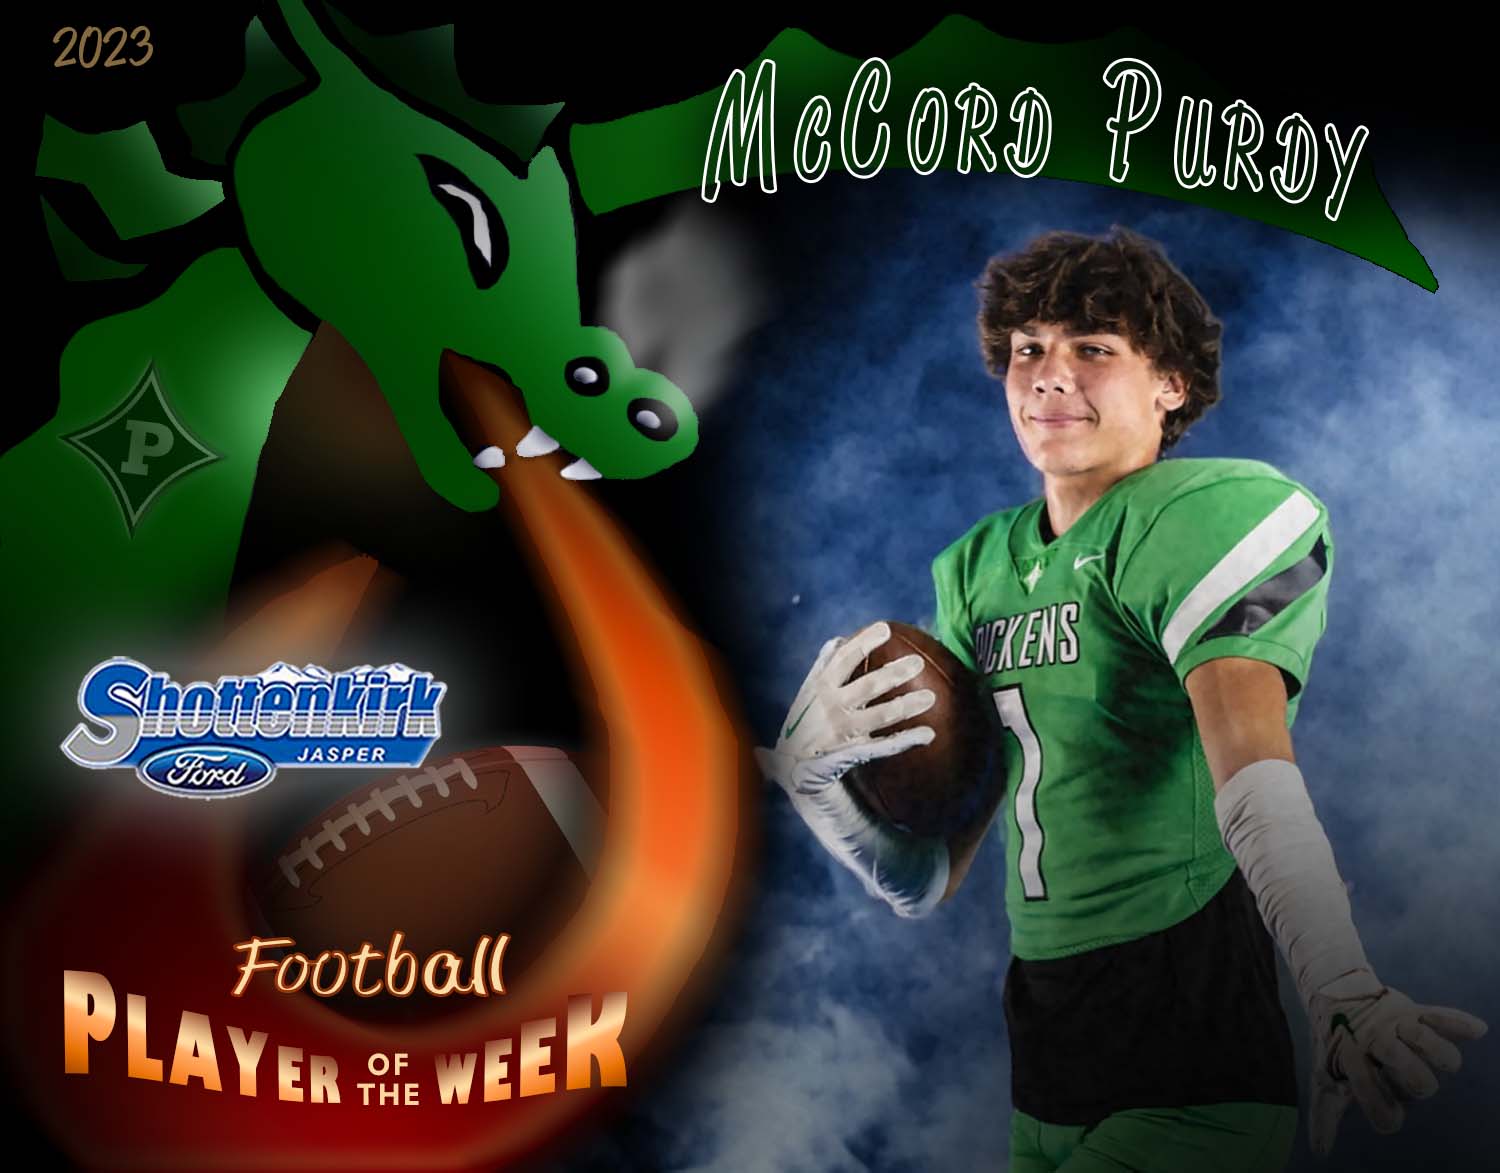 PHS Football Player of the Week #4 - McCord Purdy